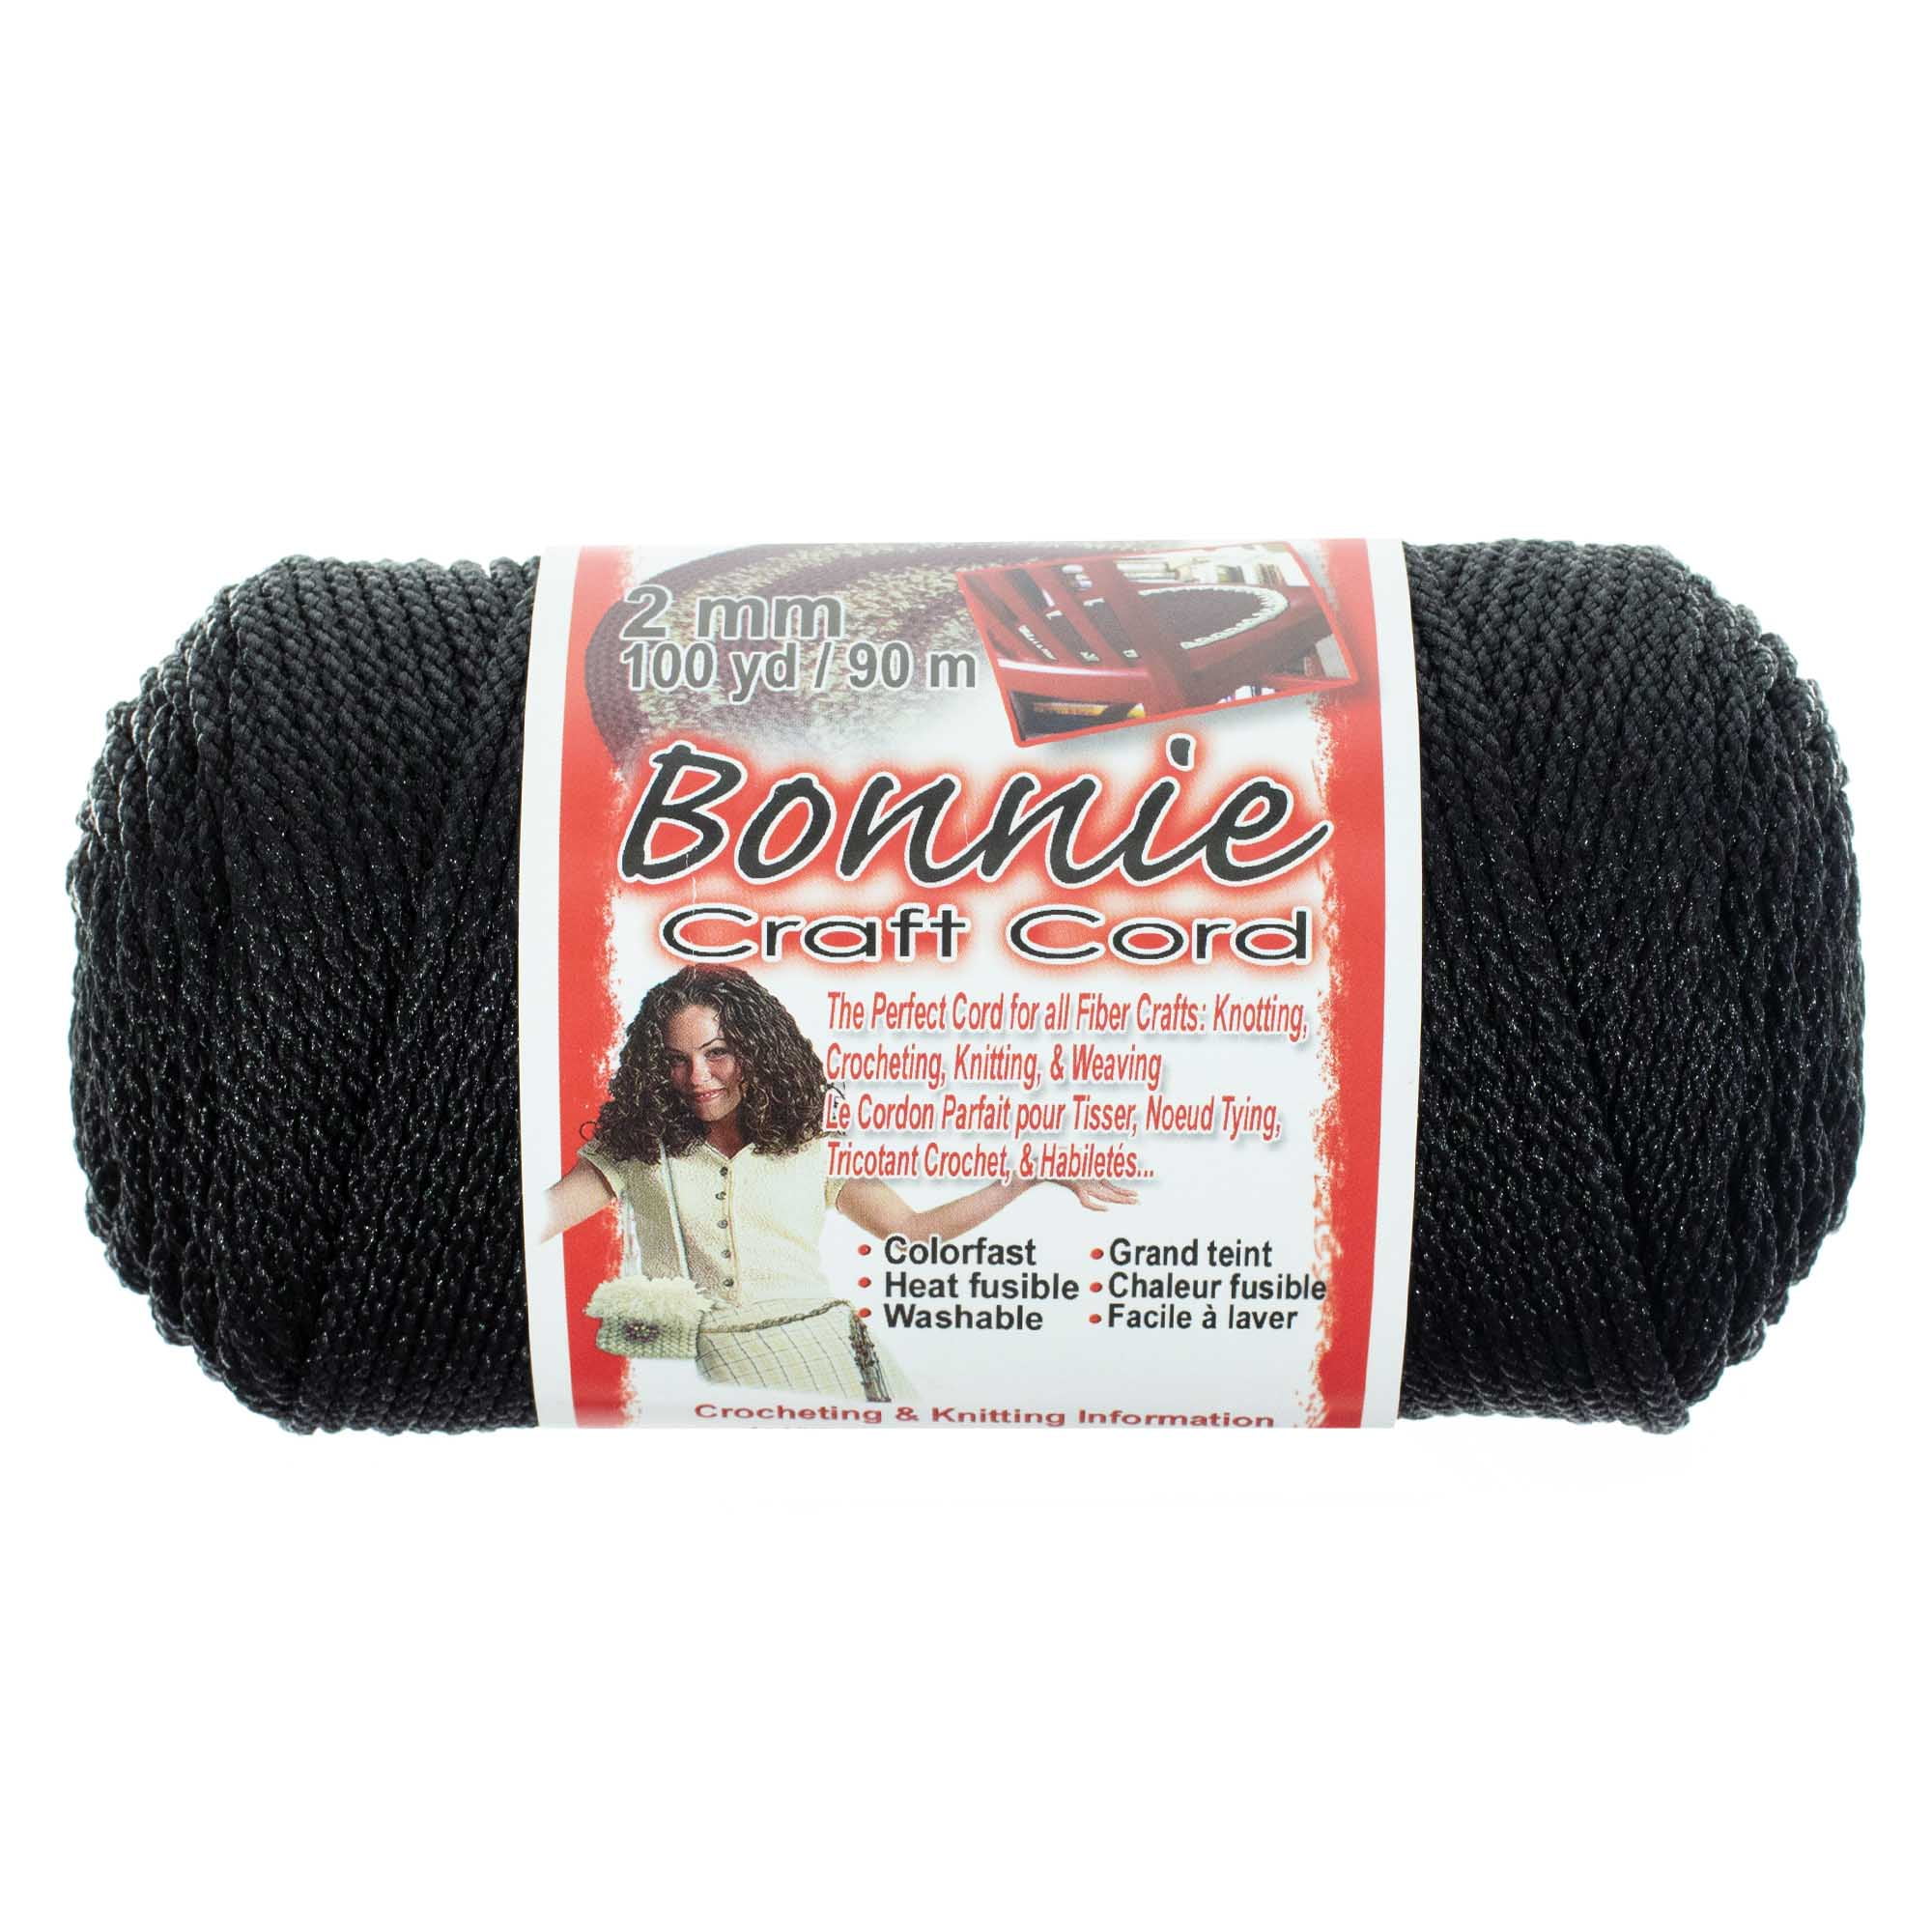 2mm Bonnie Crafting Cord and Weaving Crafts 100 Yard Spools Great for Macramé Knitting